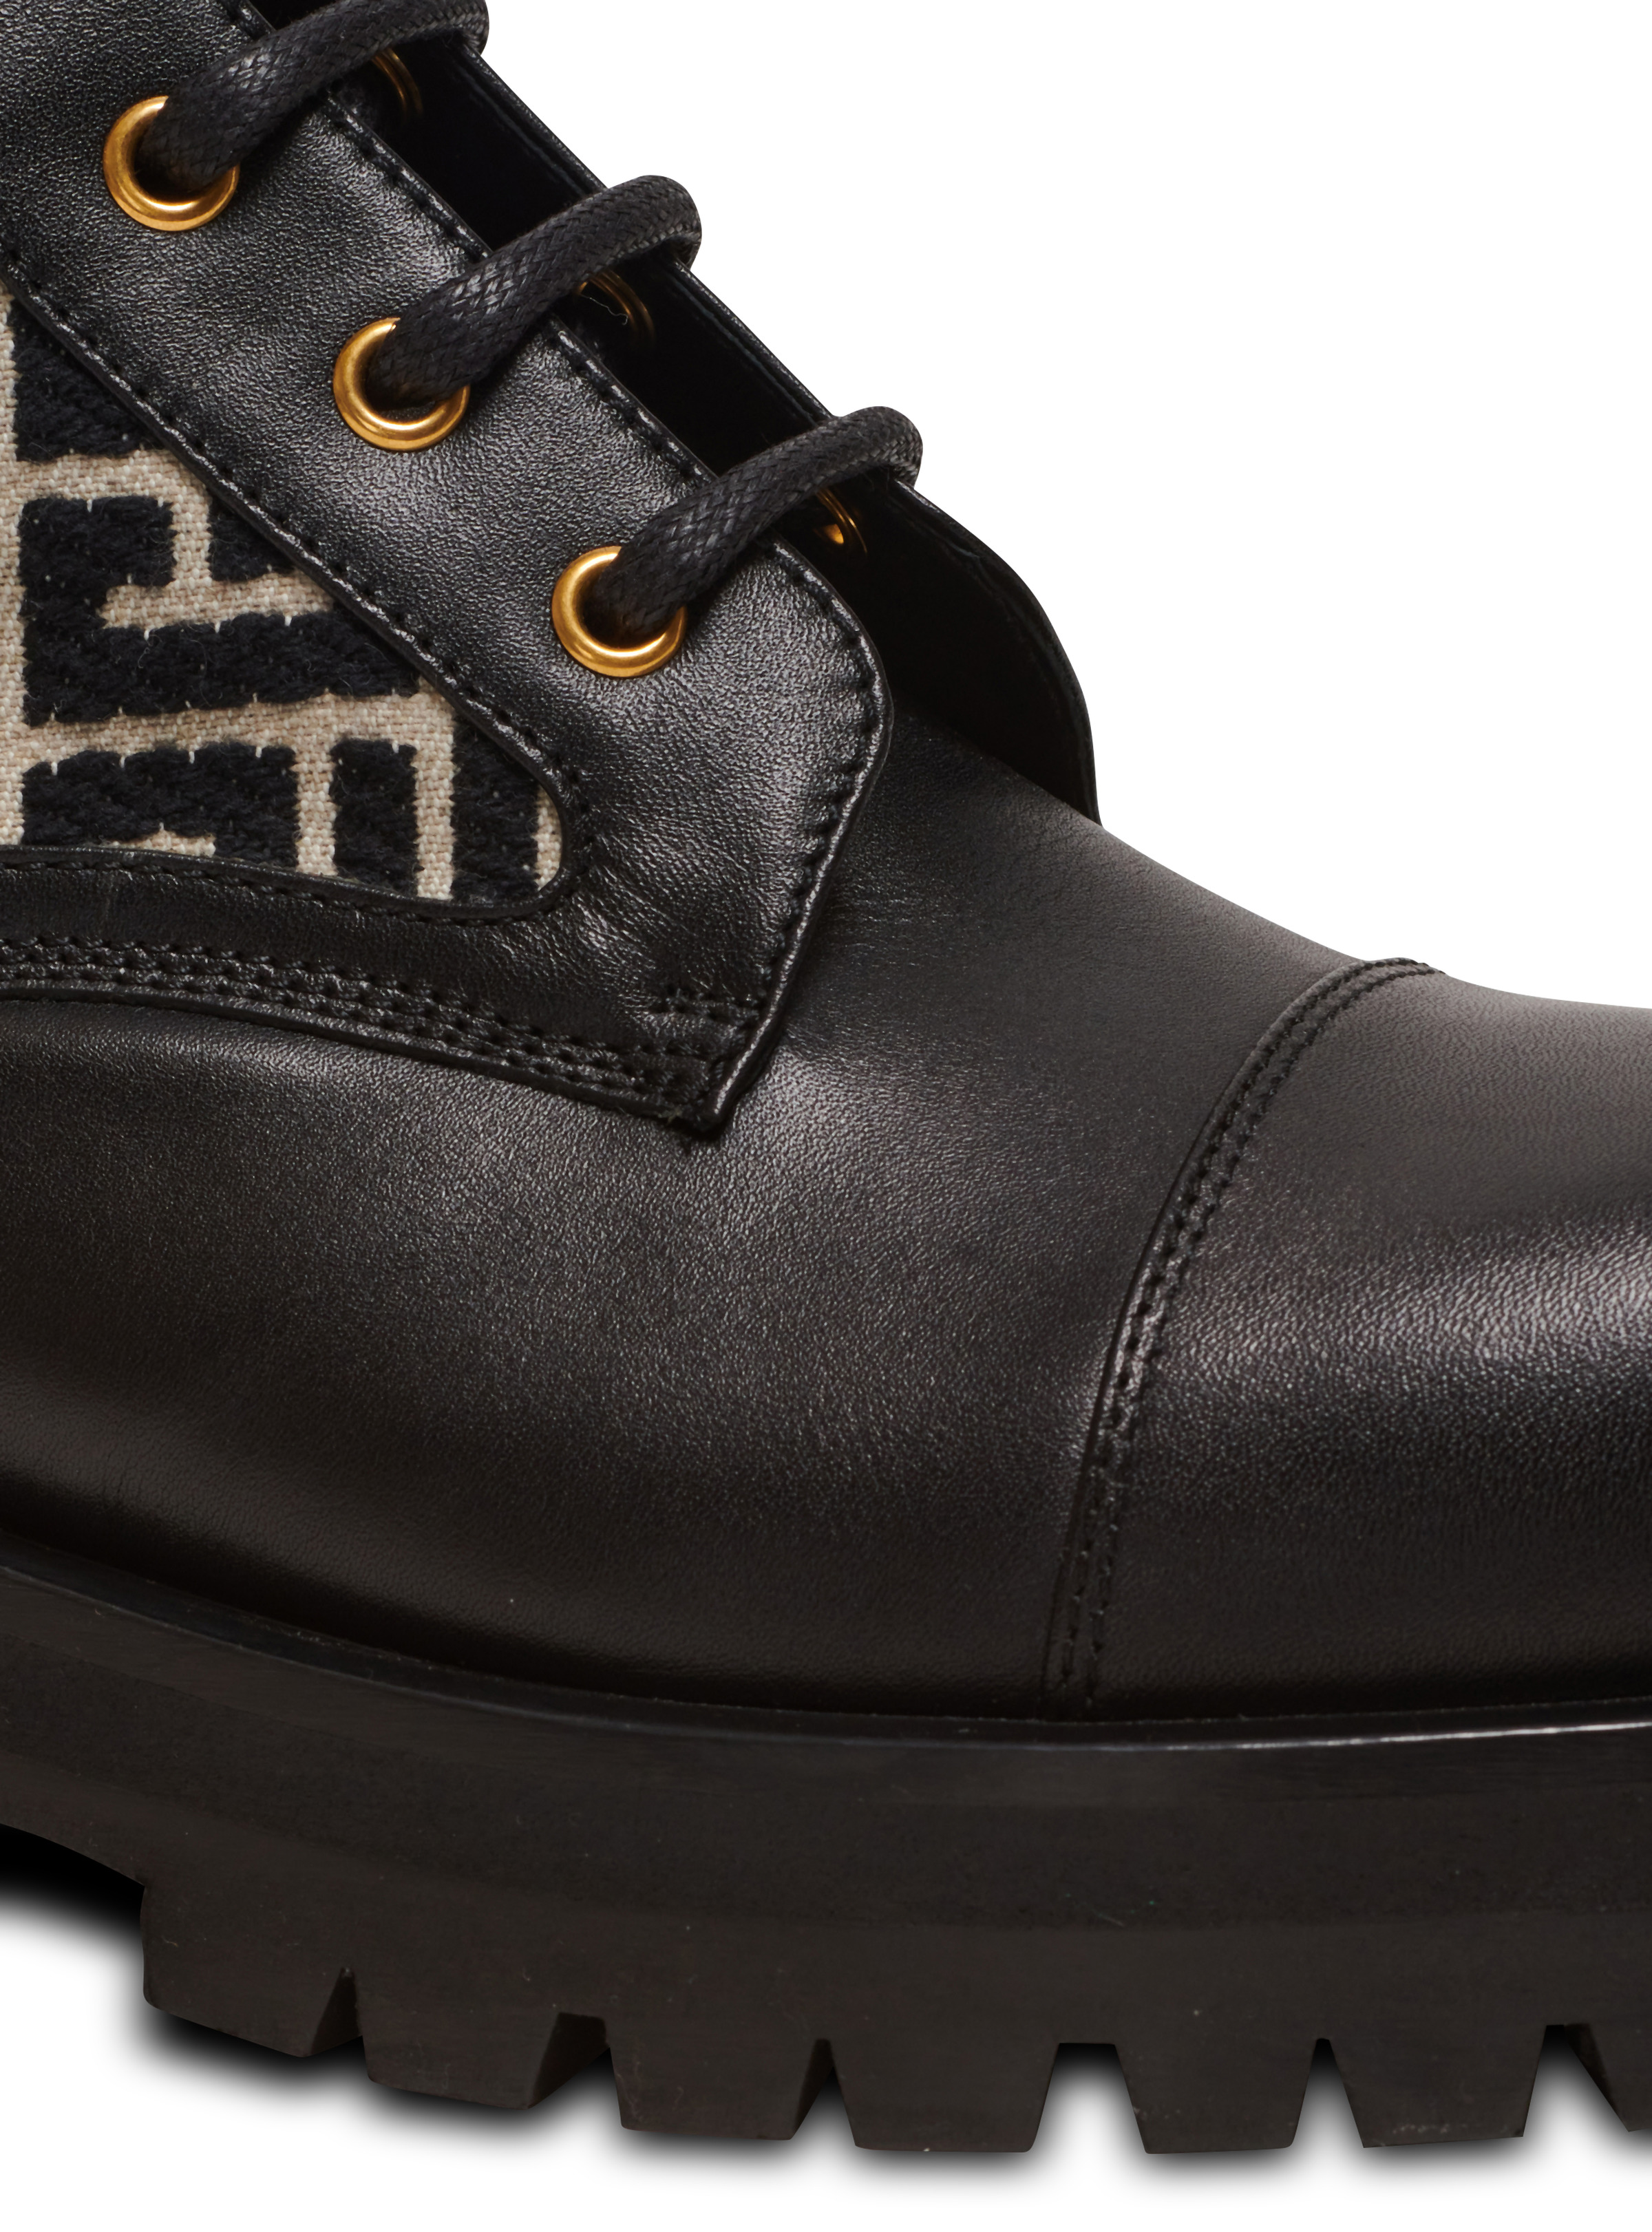 Charlie monogram jacquard and leather ranger boots - 6